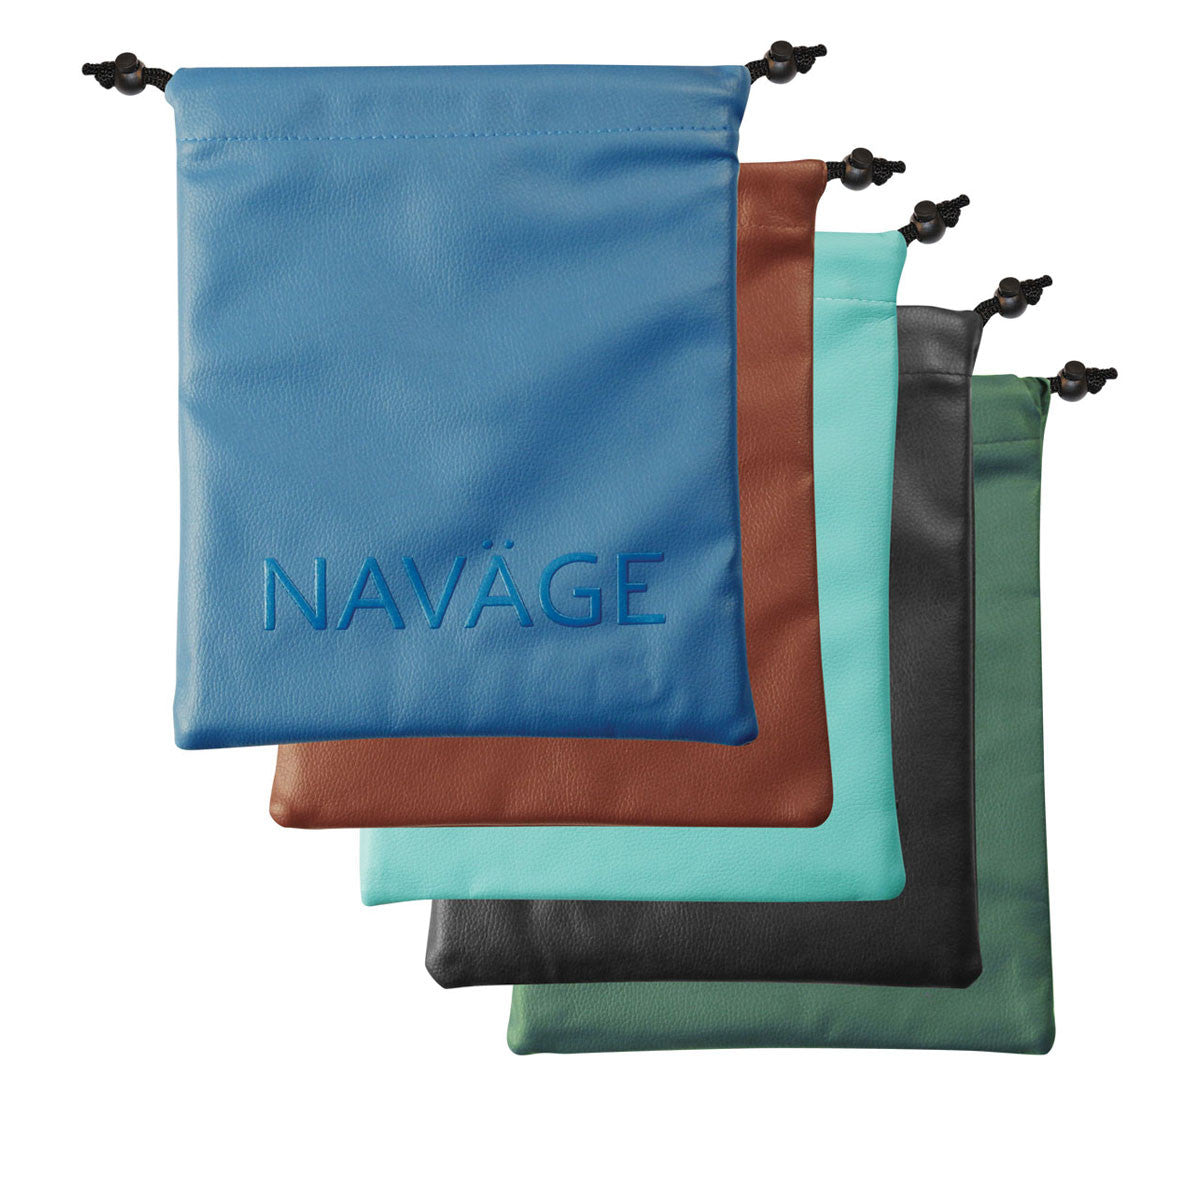 Navage Nasal Care Deluxe Bundle: Navage Nose Cleaner with 20 SaltPods,  Countertop Caddy, and Travel Bag. 142.85 if Purchased Separately. Save  22.90. for Improved Nasal Hygiene (Sky Blue)